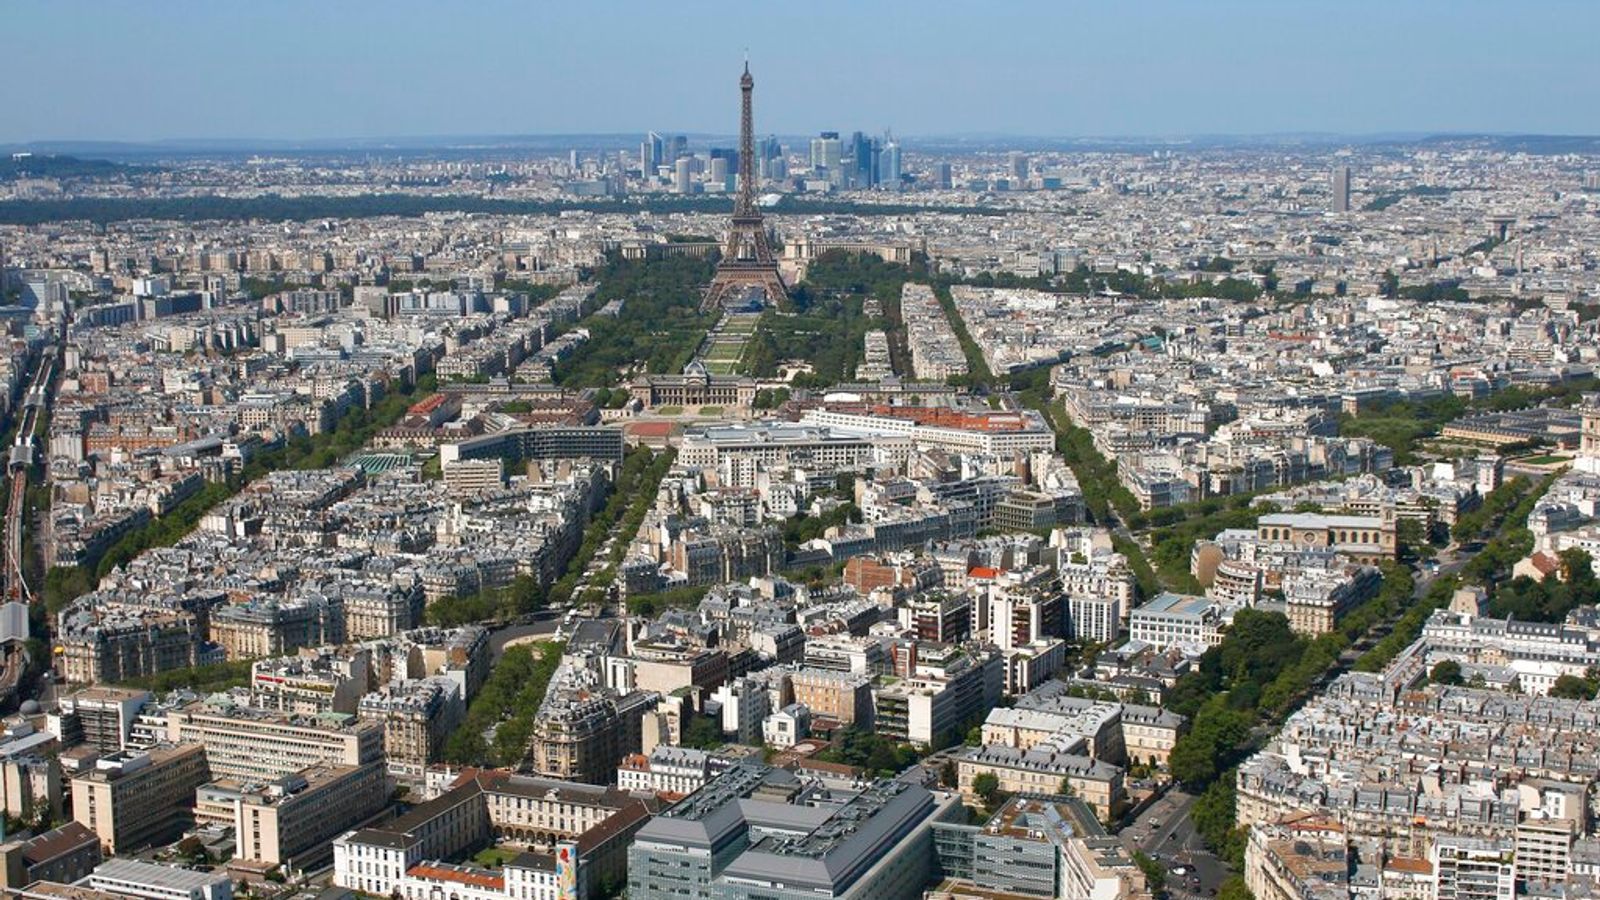 Paris: One dead and two injured after assailant targets tourists in French capital